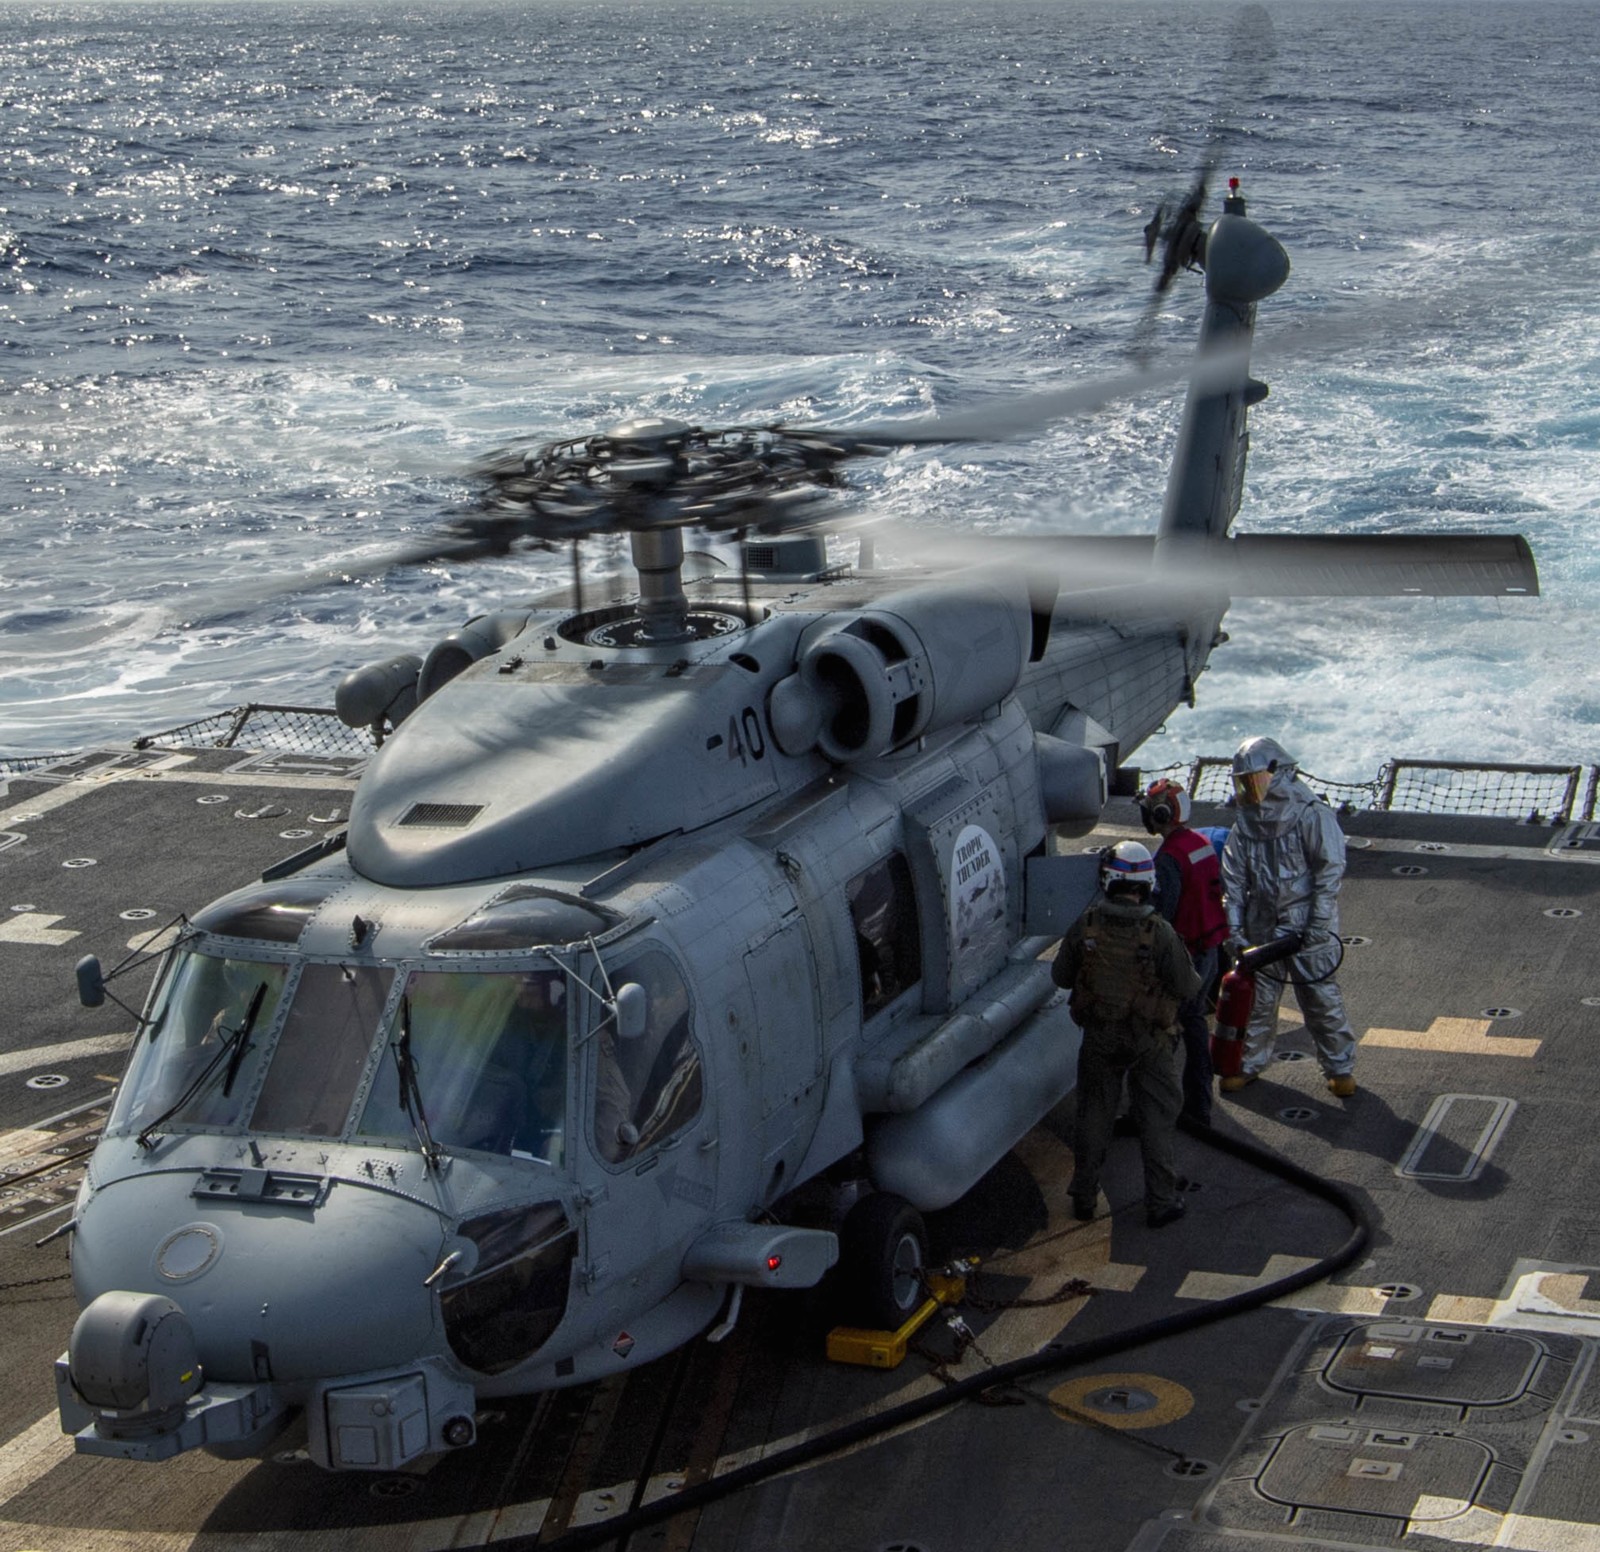 hsm-35 magicians helicopter maritime strike squadron us navy mh-60r seahawk 60